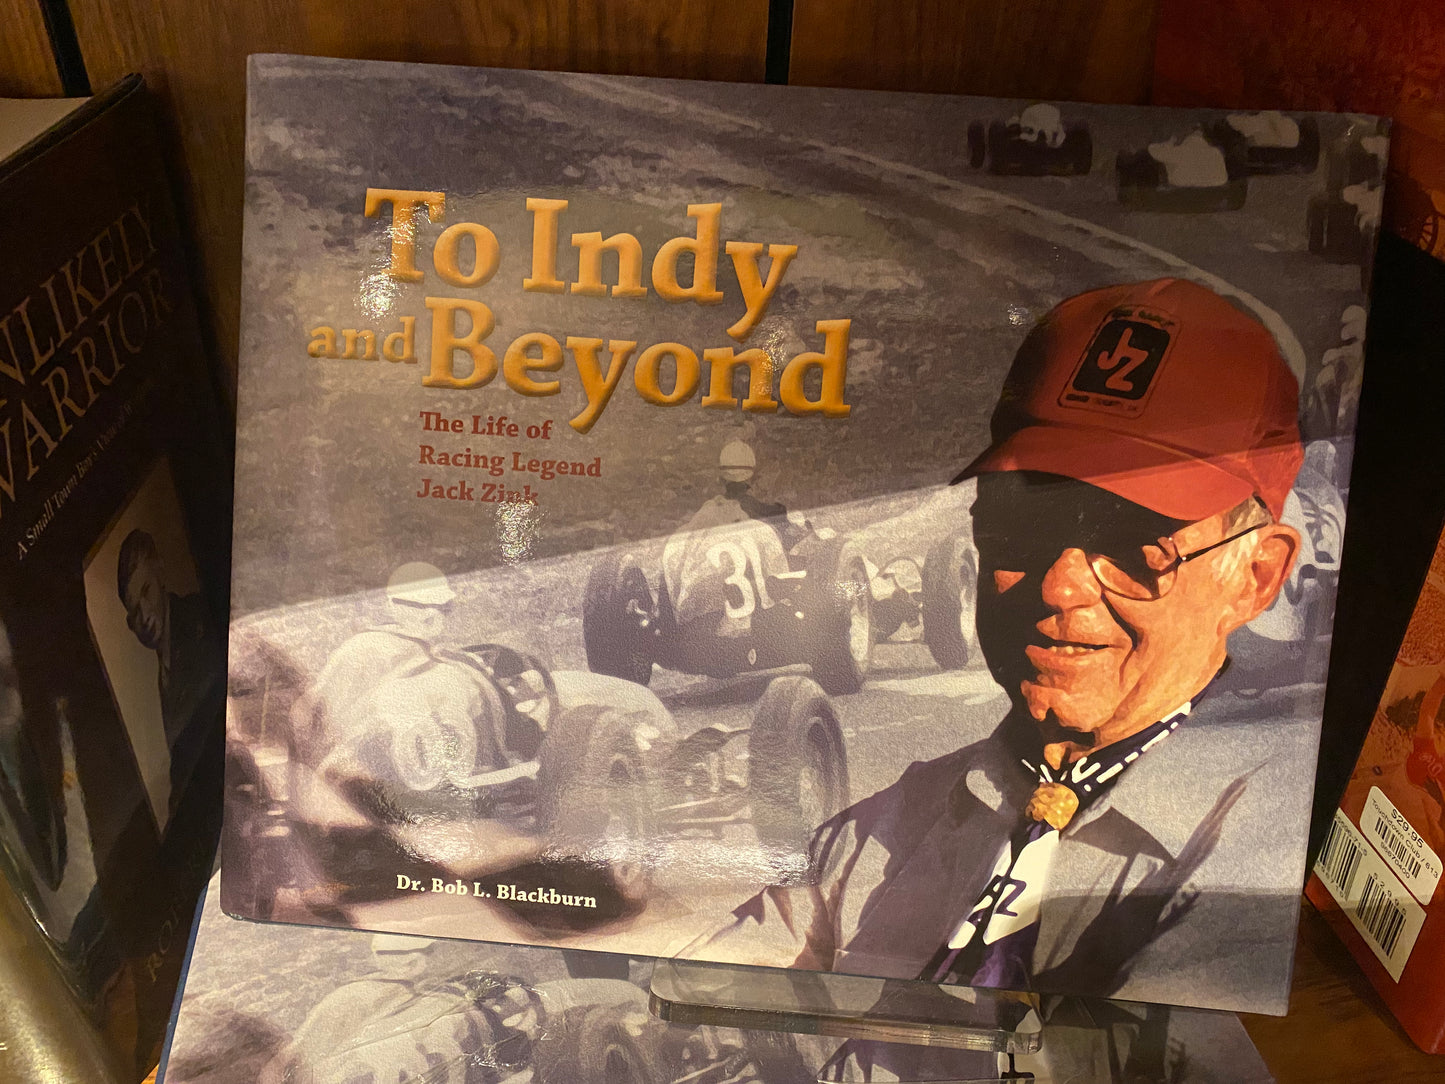 To Indy and Beyond: The Life of Racing Legend Jack Zink